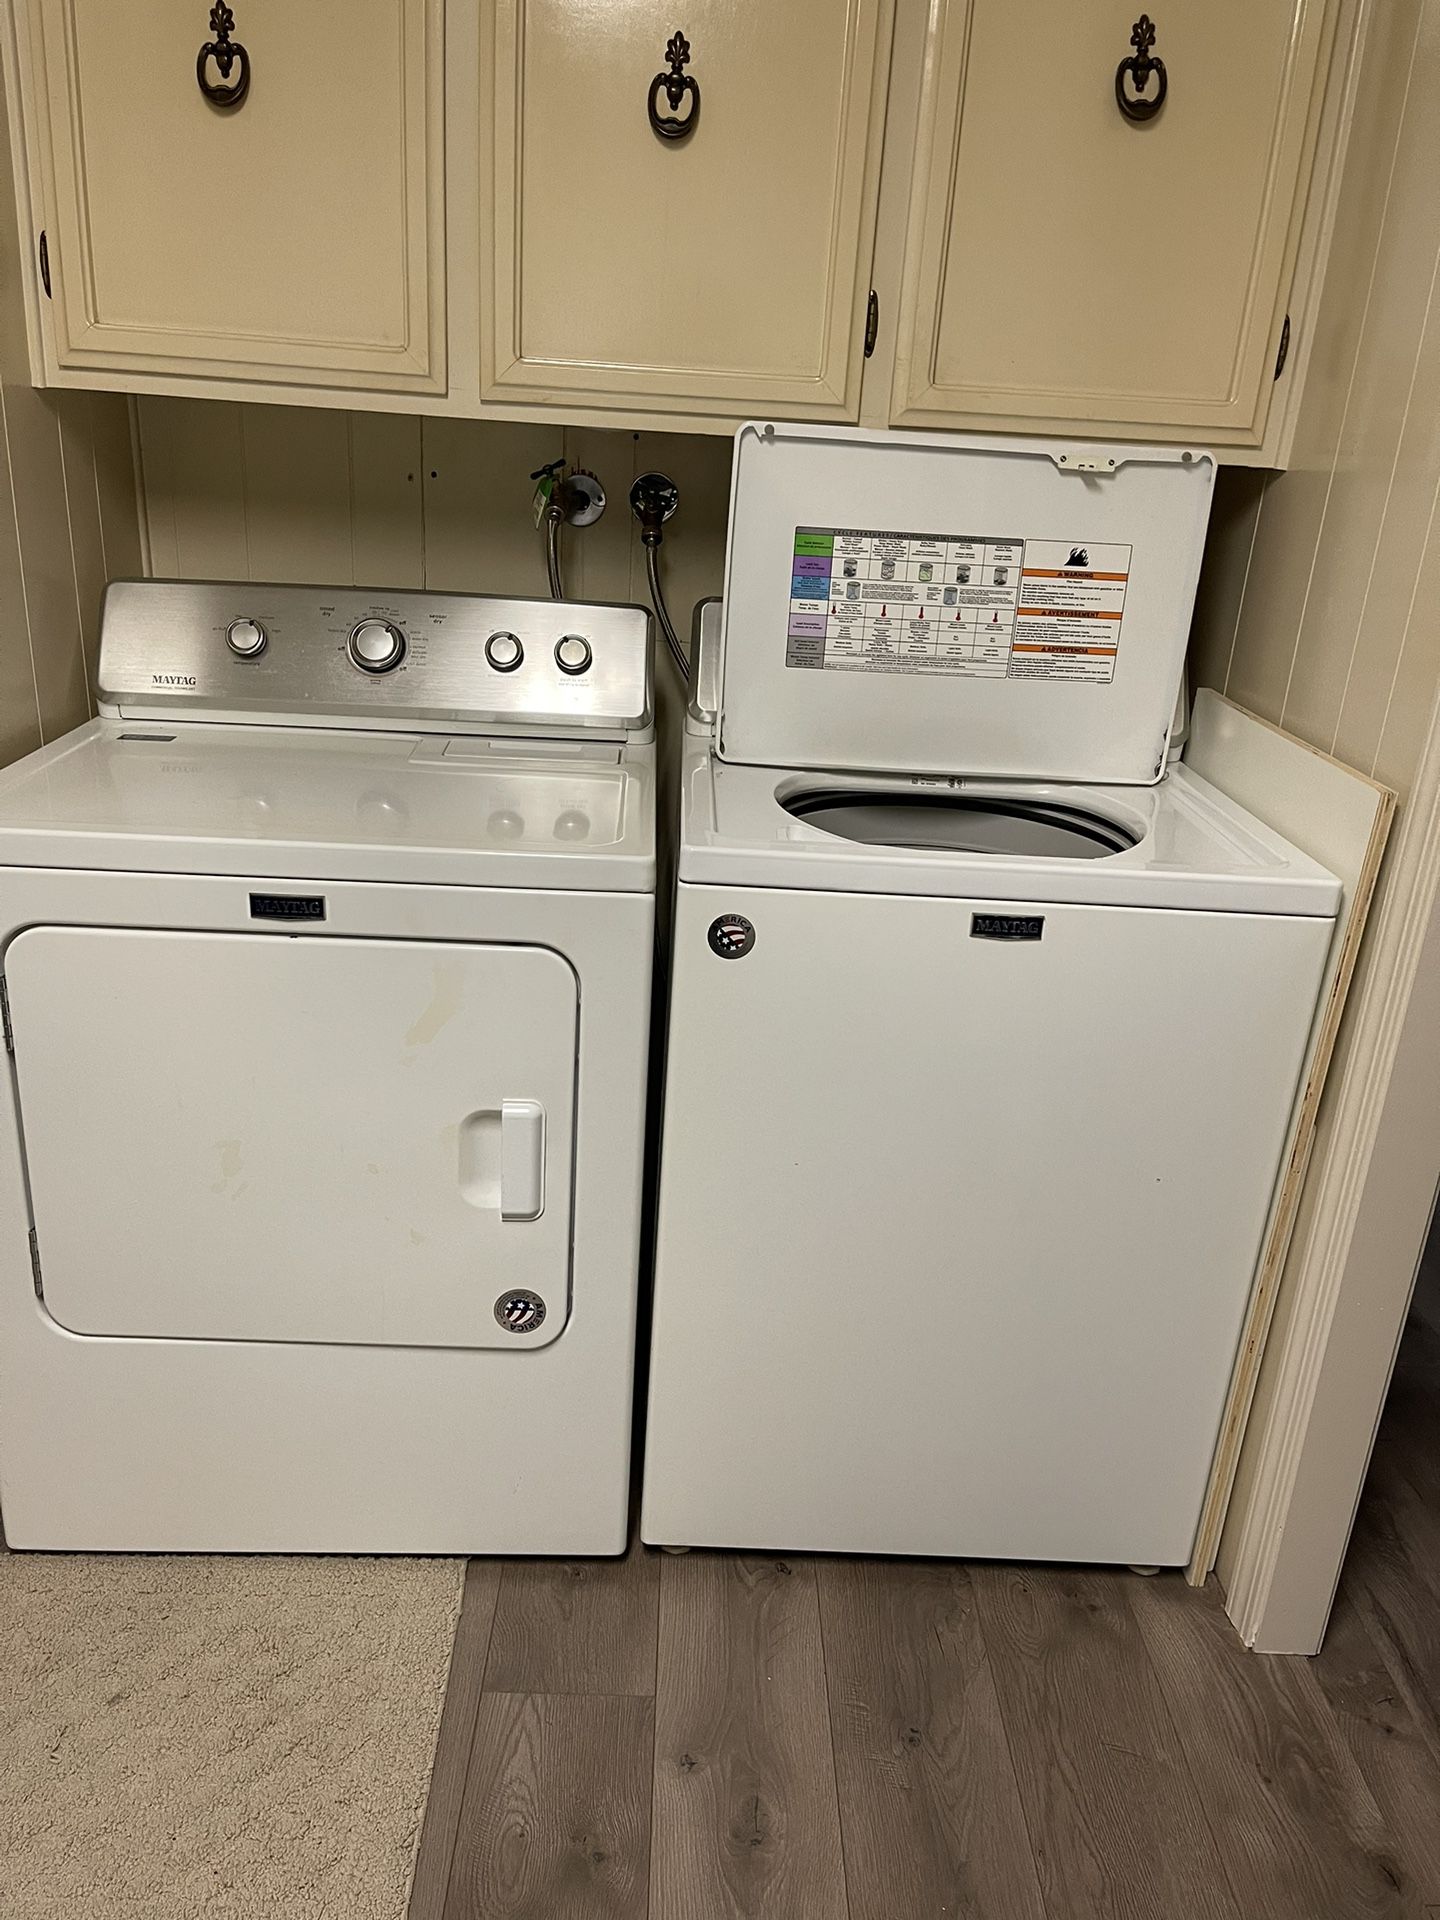 Maytag Electric Washer And Dryer